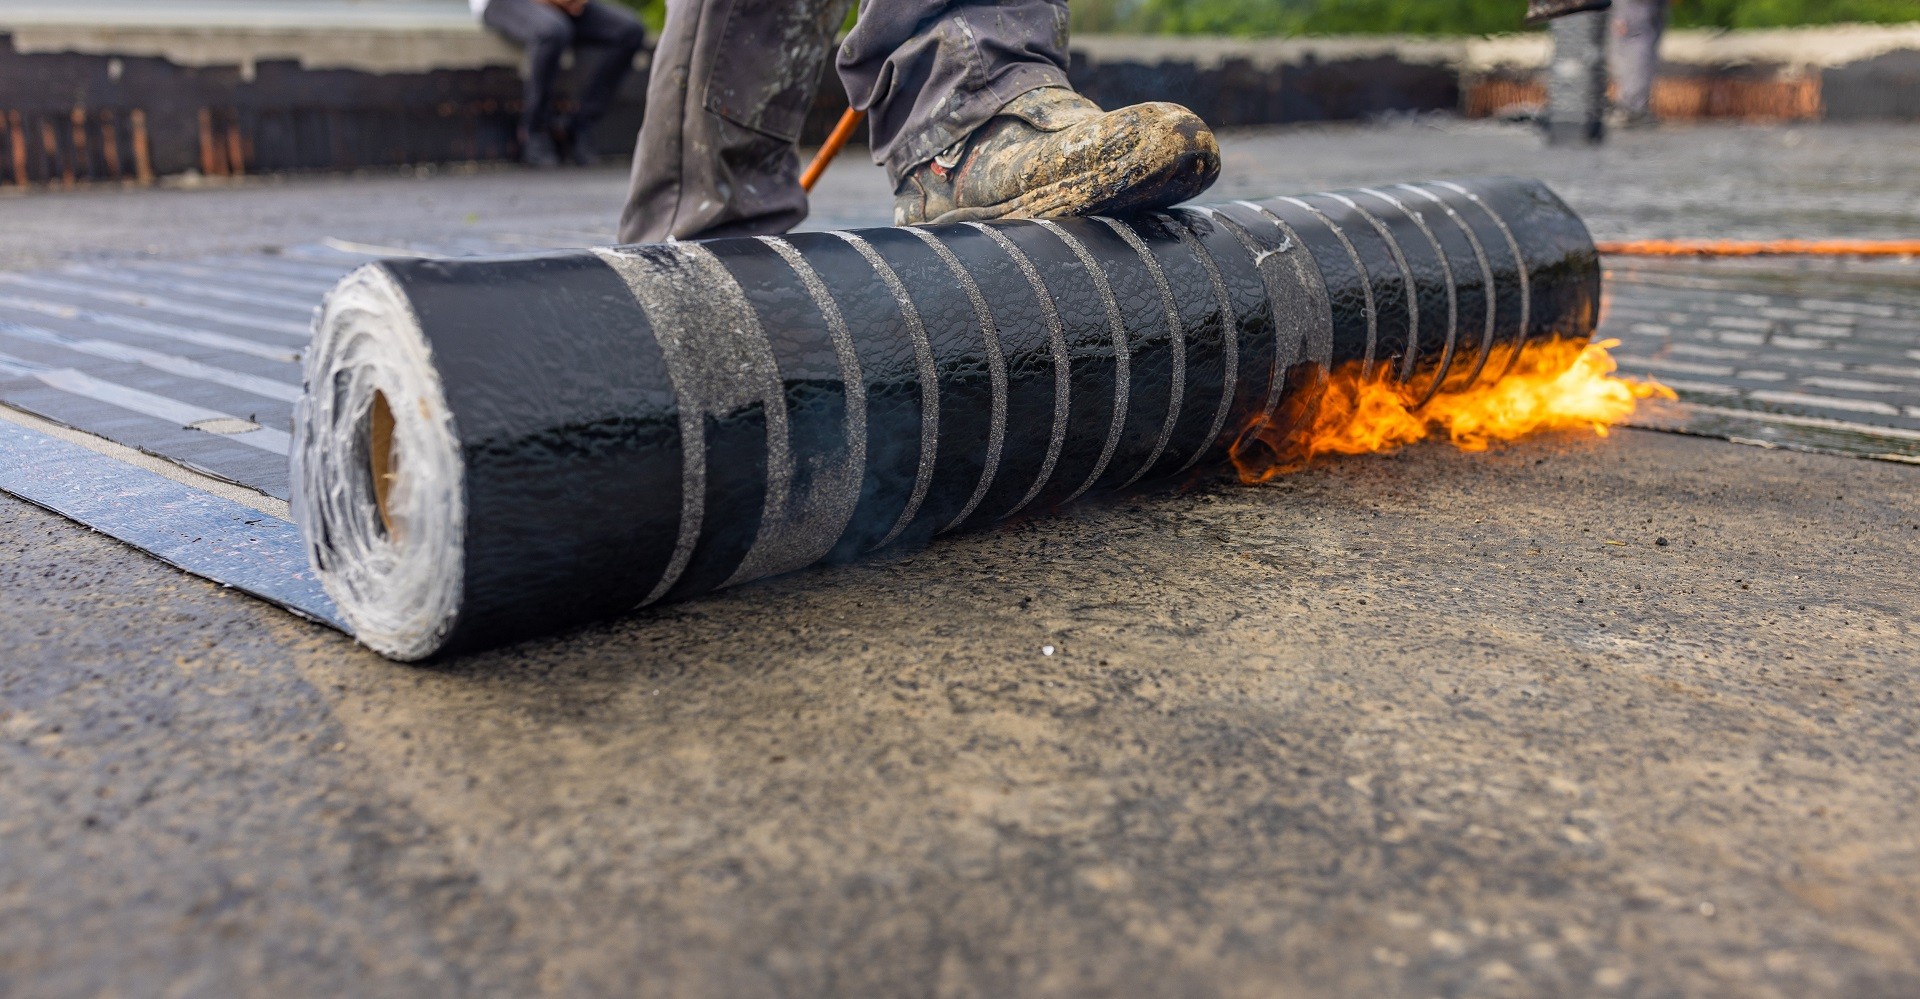 Workers placing a vapor barrier on the roof using a propane gas torch for welding bitumen sheets.